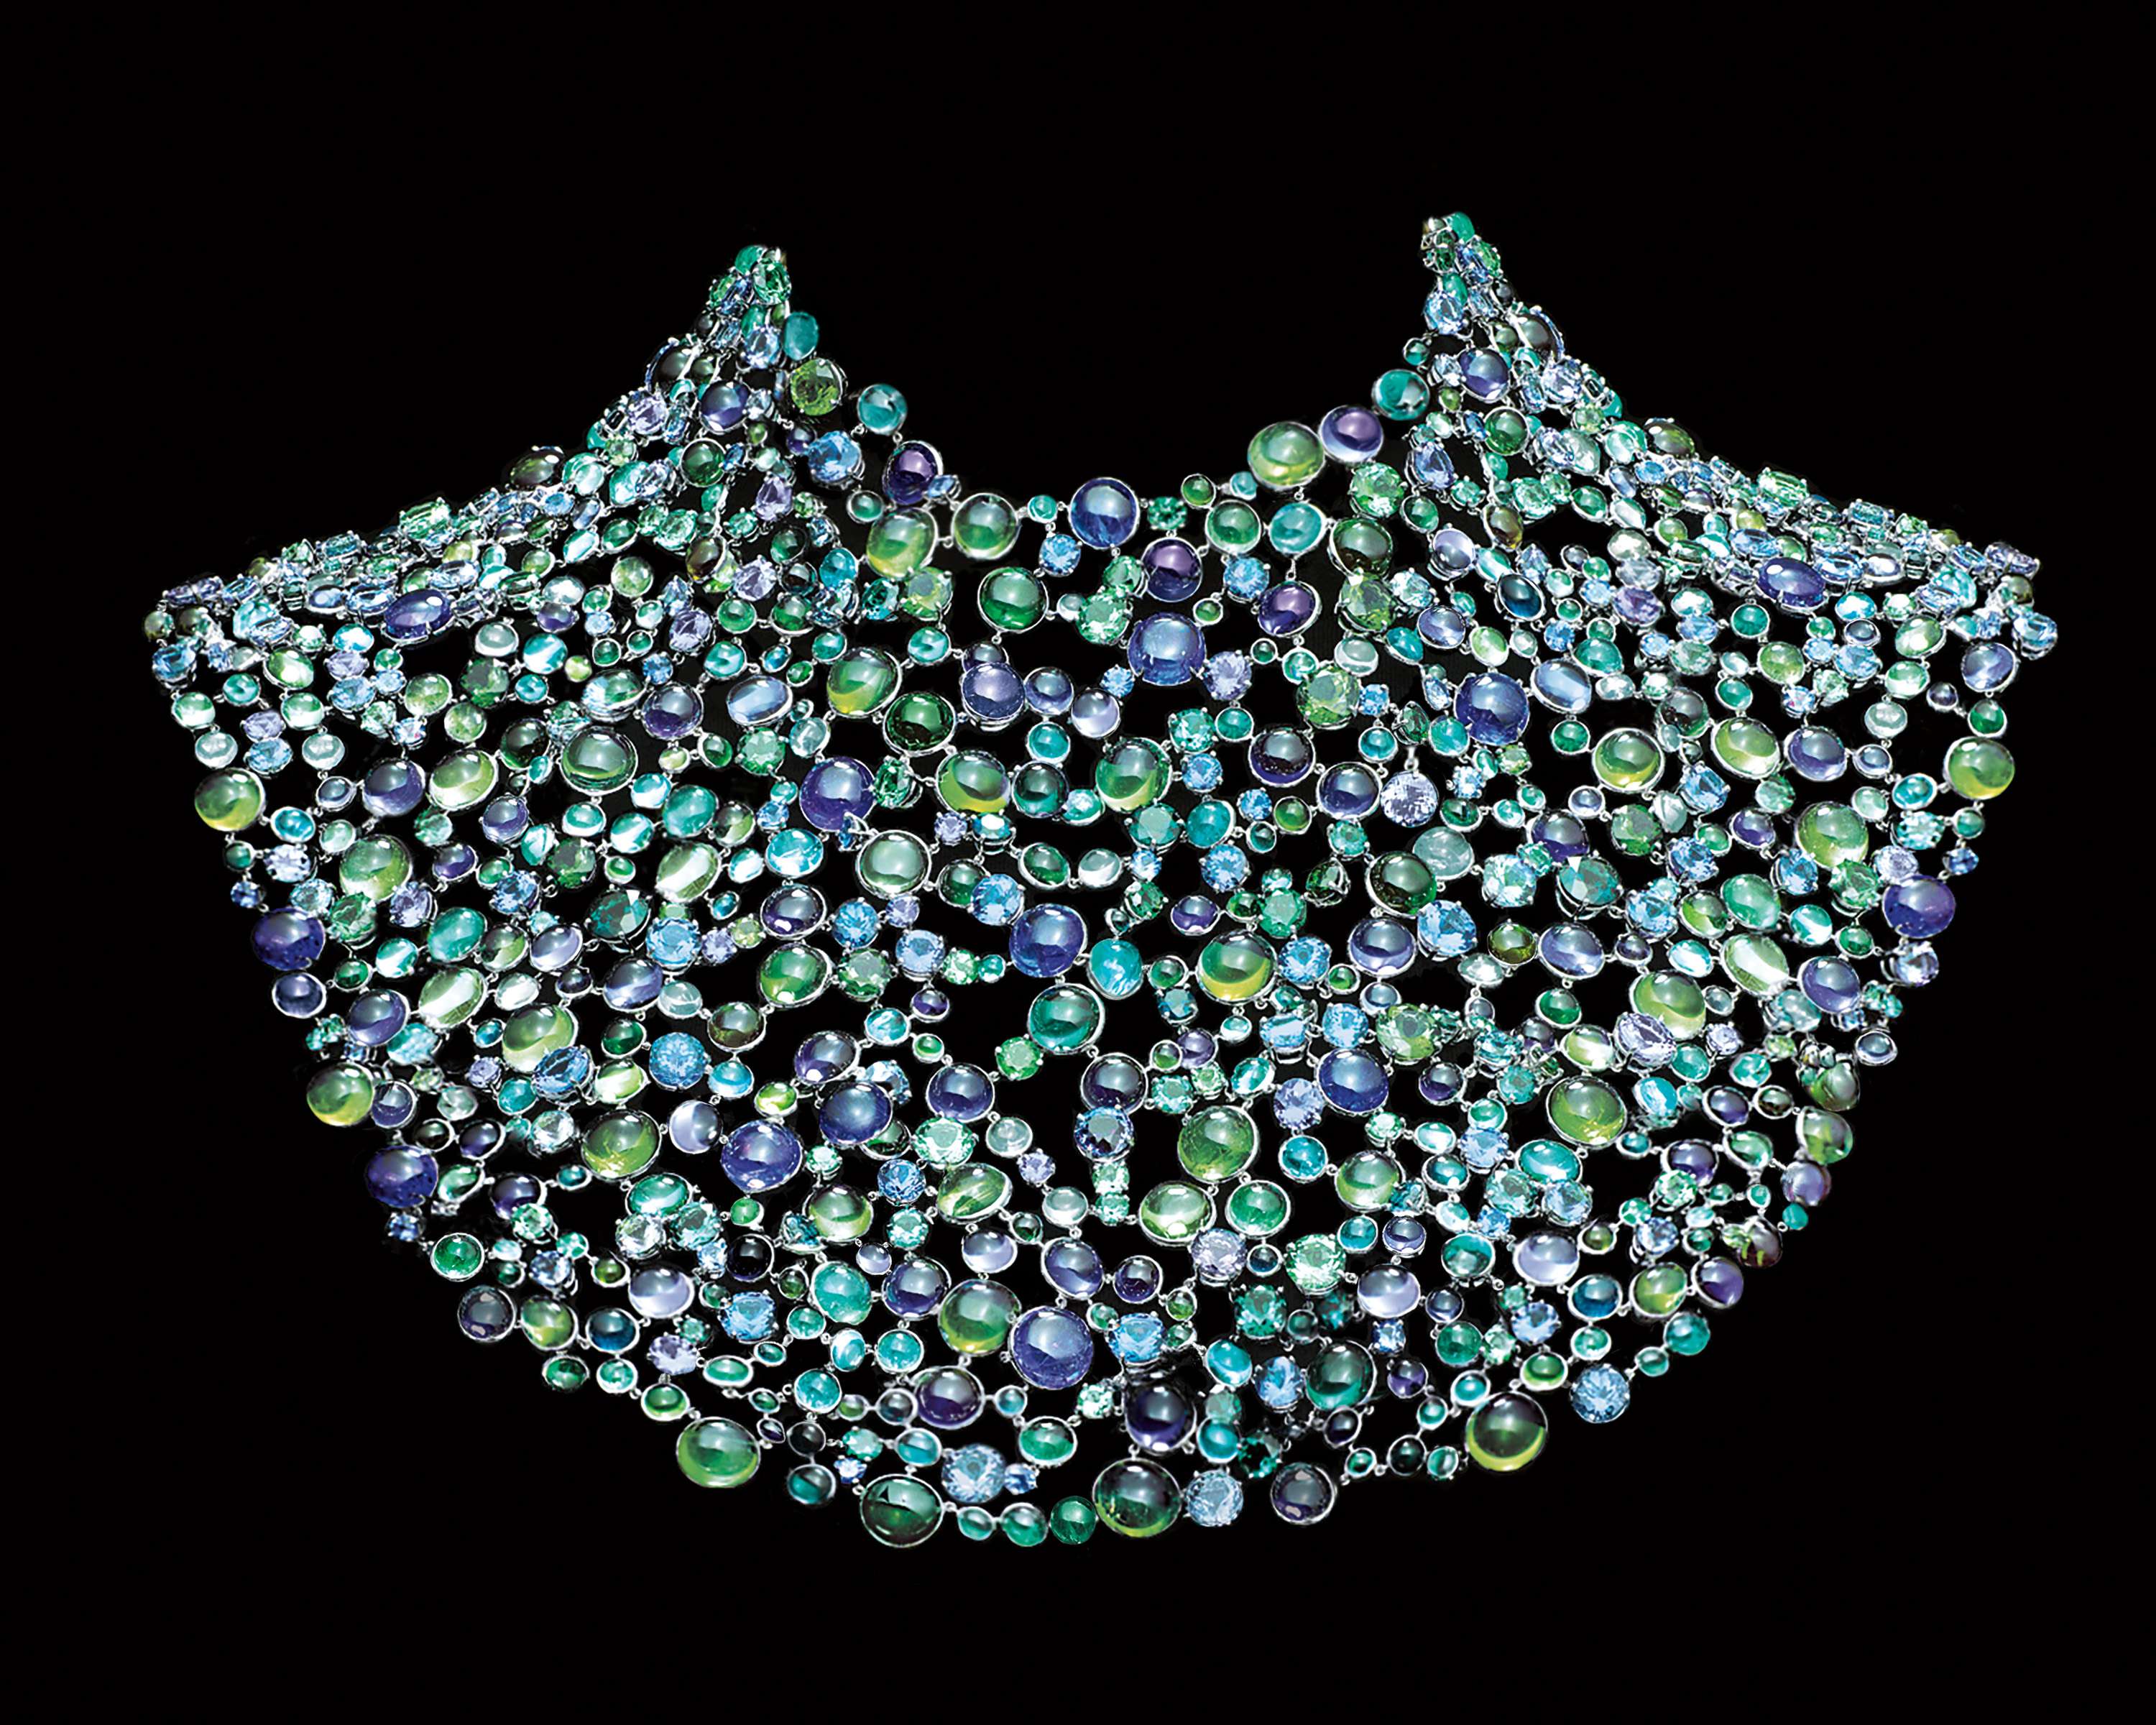 Necklace of cabochon and faceted green and blue tourmalines, tanzanites, iolites, apatites and sapphires, from the Tiffany Blue Book 2016 The Art of Transformation